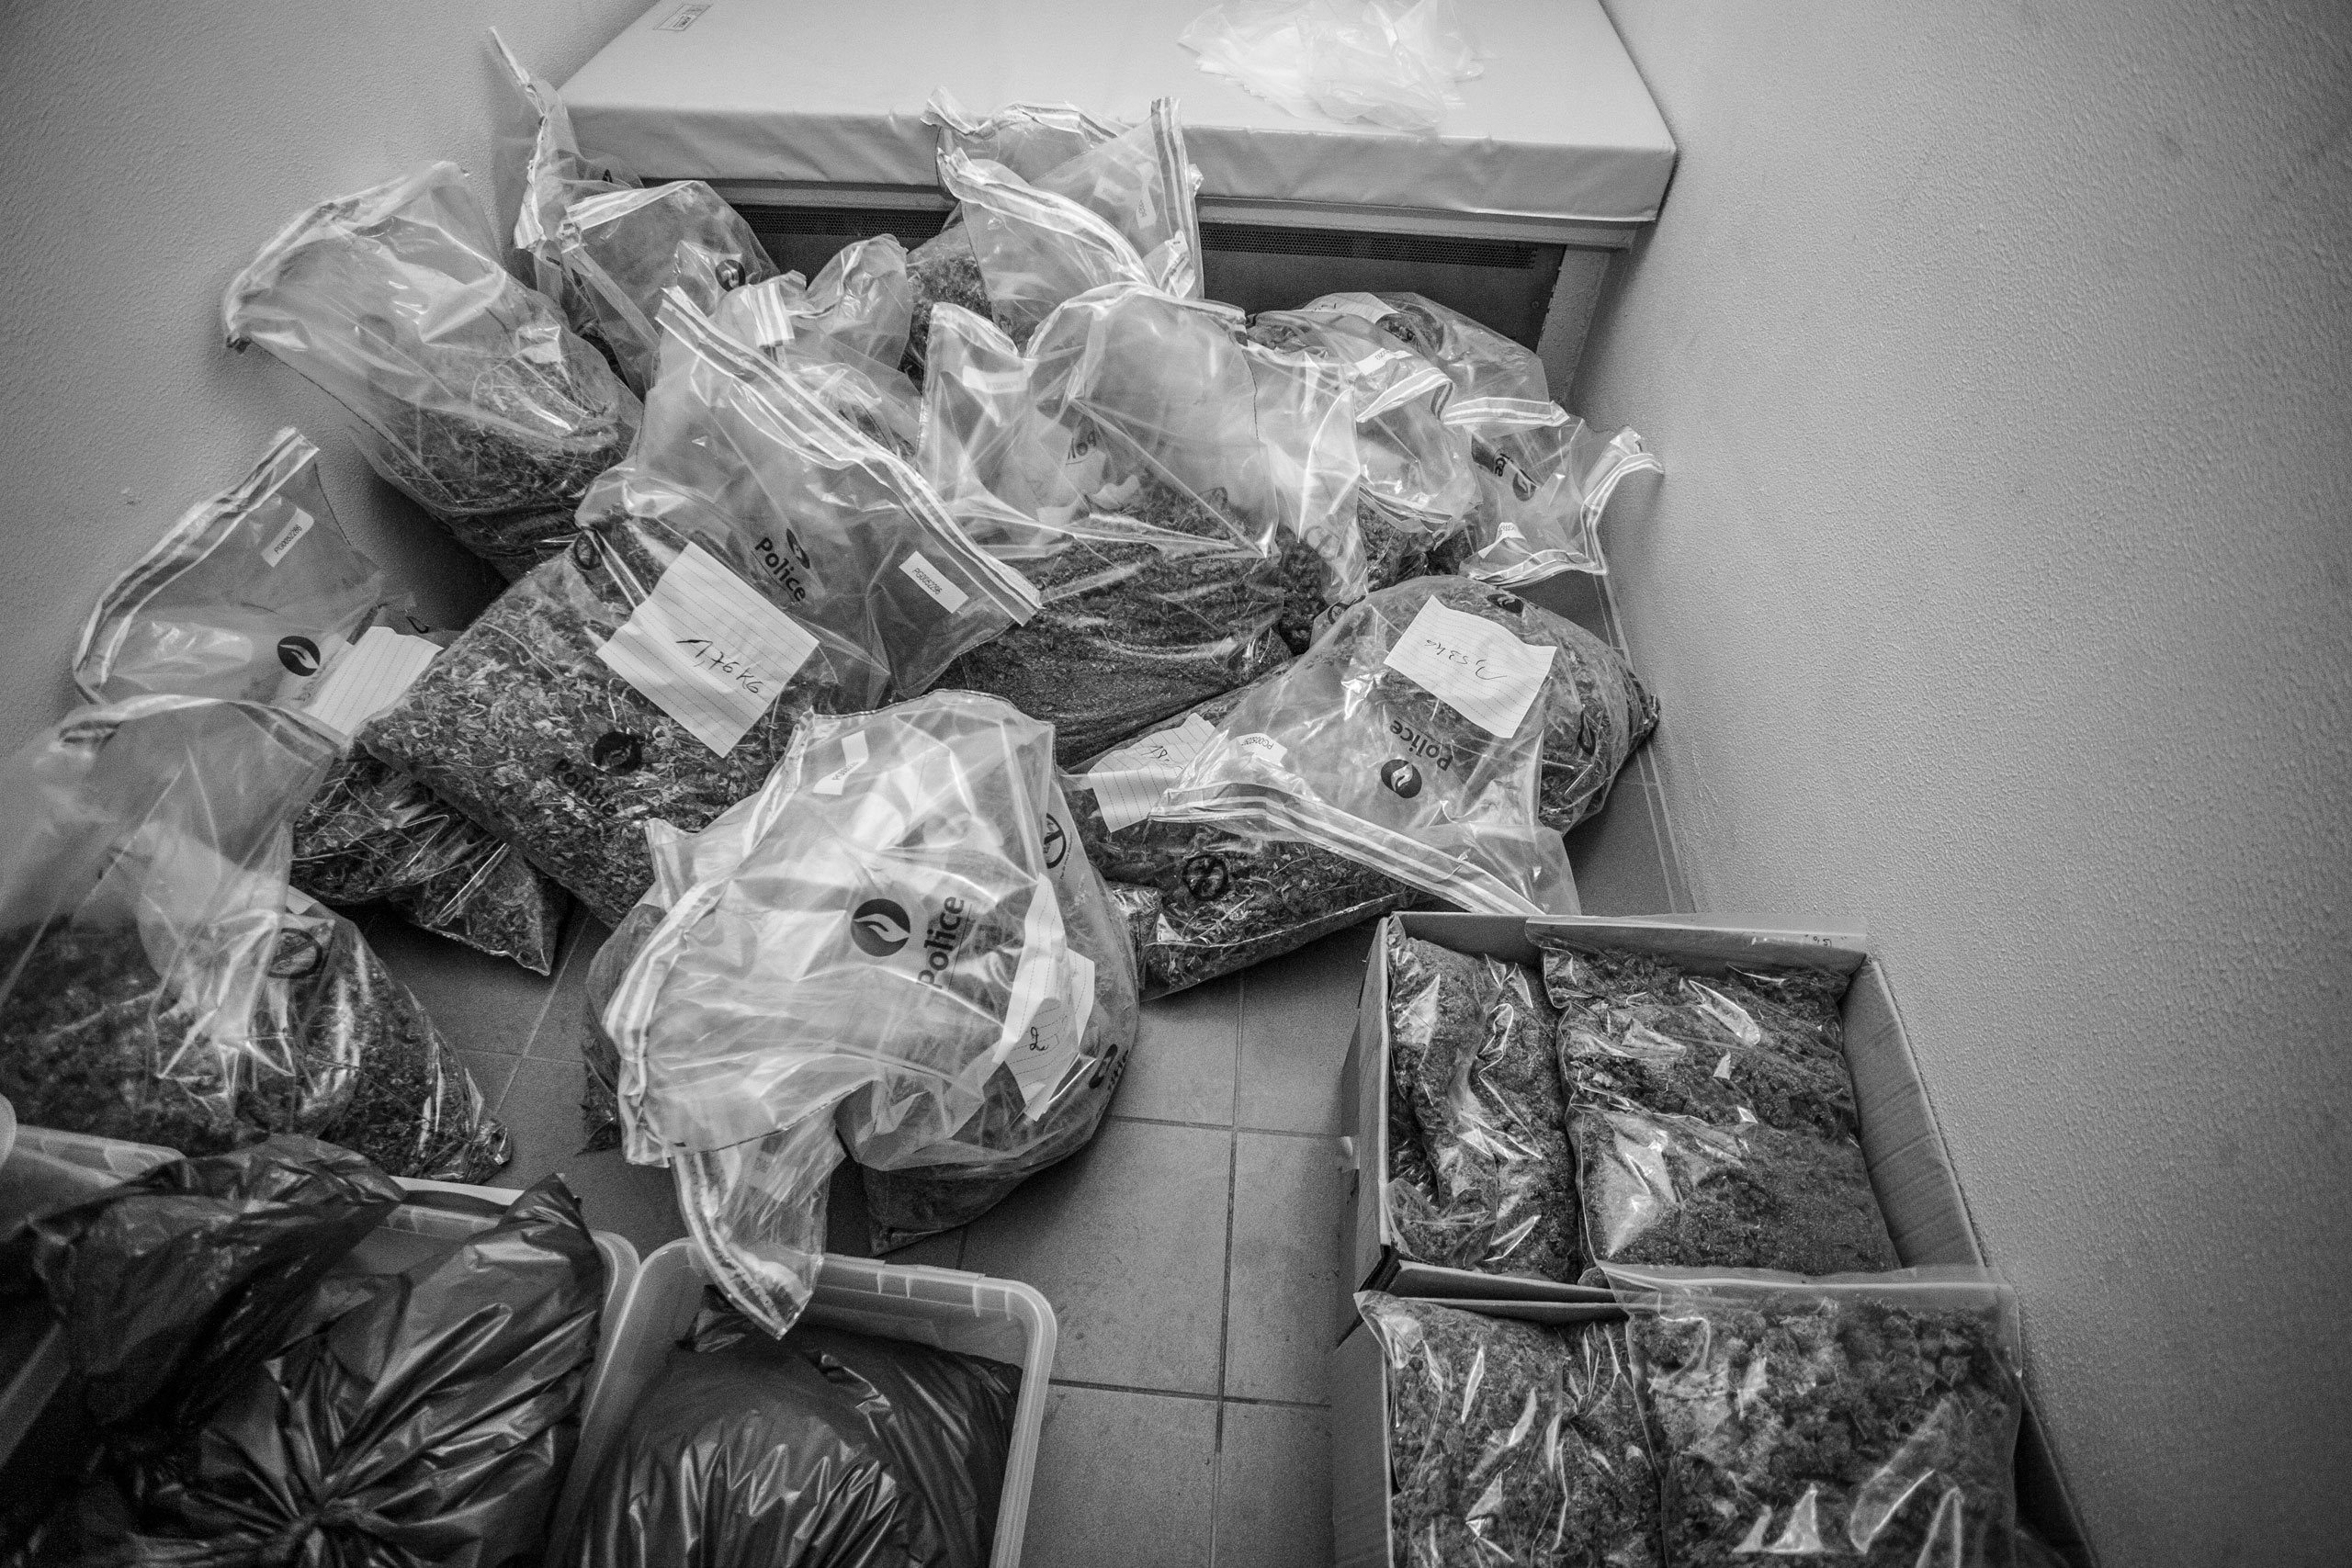 One of the biggest loads of hashish seized by the civilian branch of the Brussels West Police,  Molenbeek, Brussels, May, 2010.